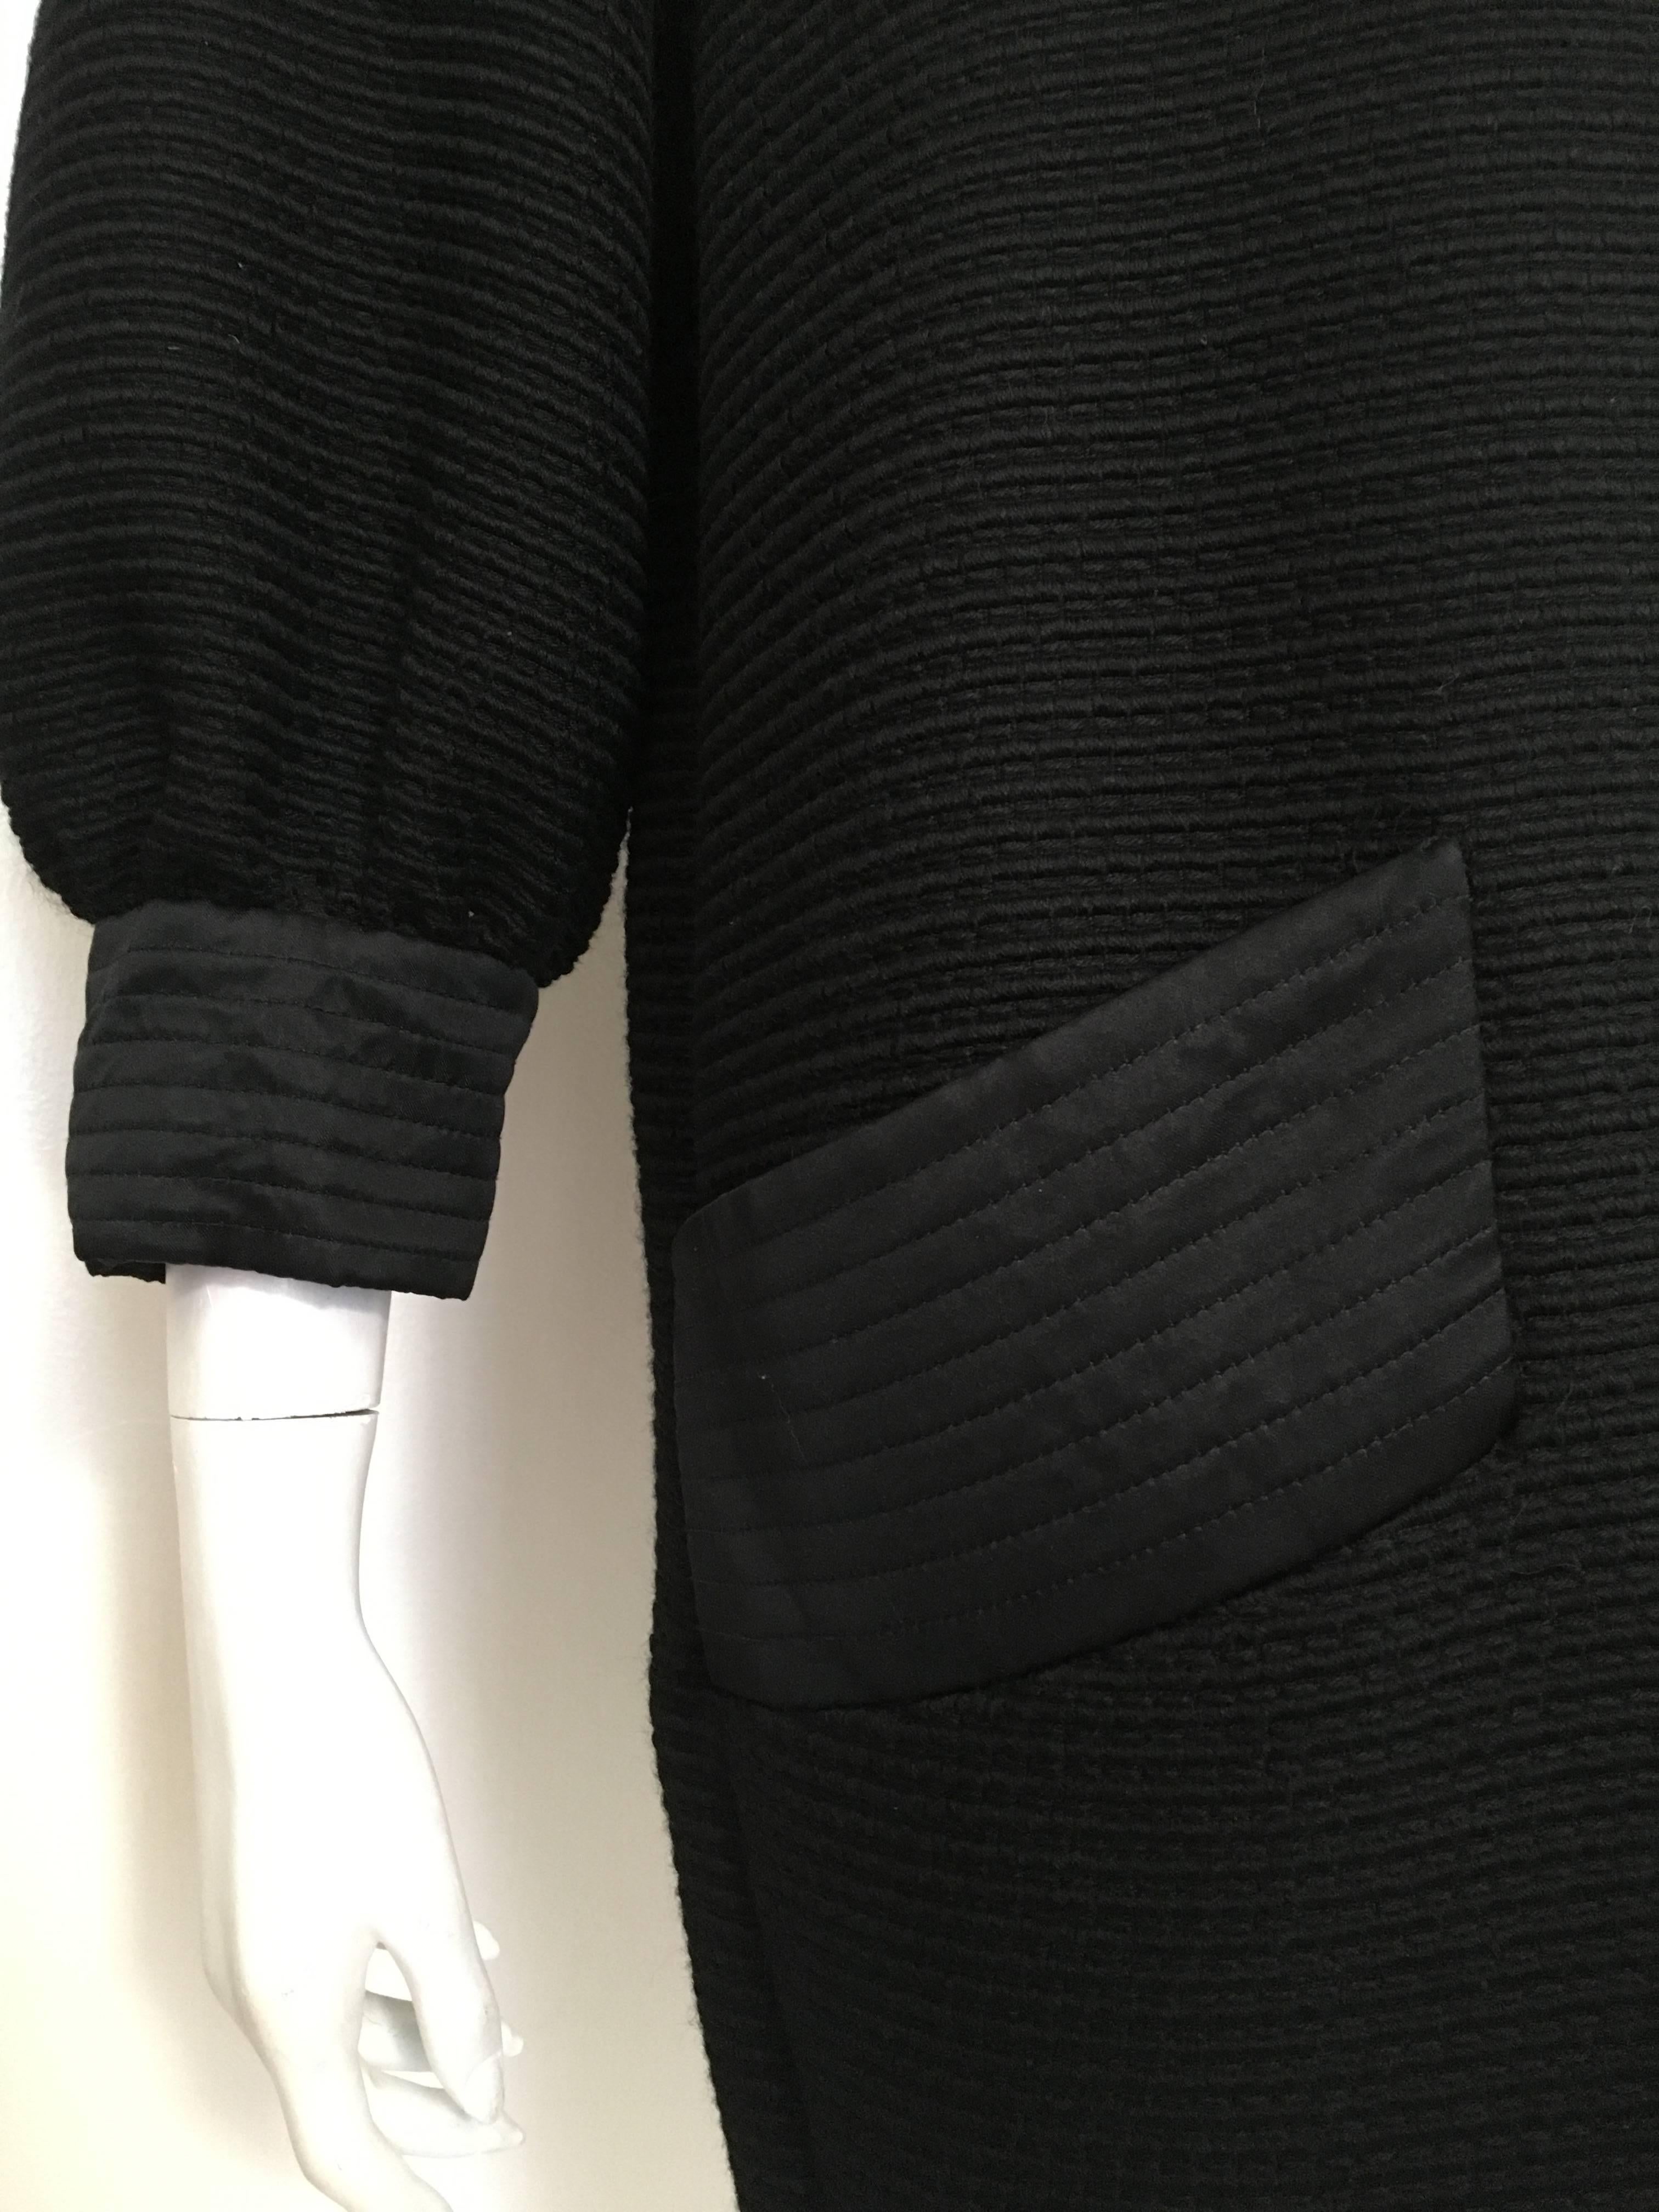 Women's or Men's Carolyne Roehm Black Cotton Ribbed Dress, 1980s  For Sale